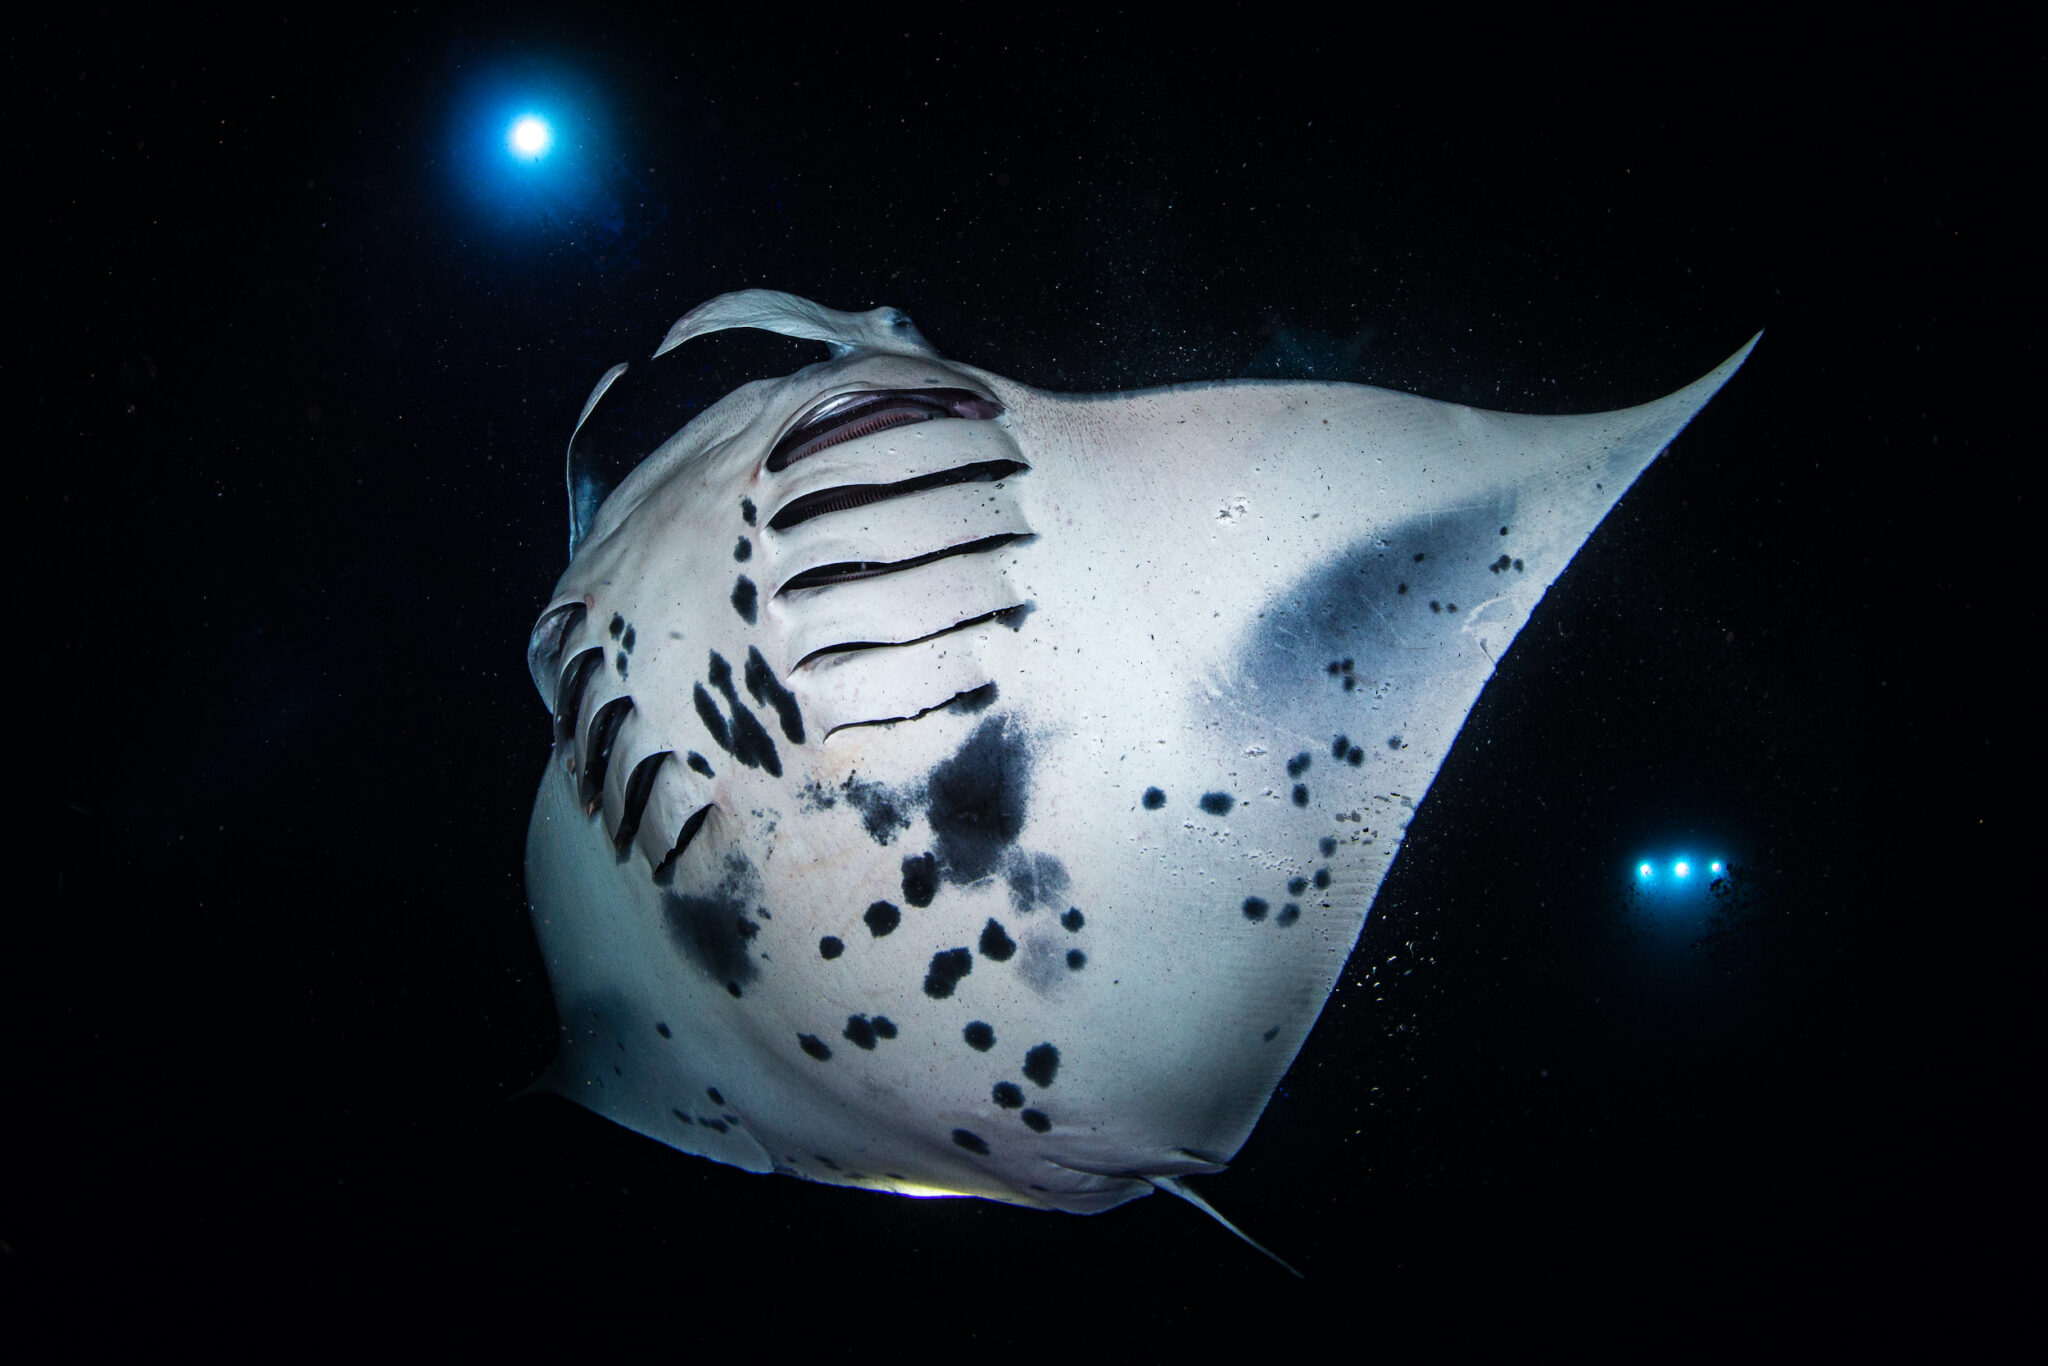 A manta ray dances between divers on a night dive, a Kona scuba diving activity that makes it one of Hawaii's best dive sites